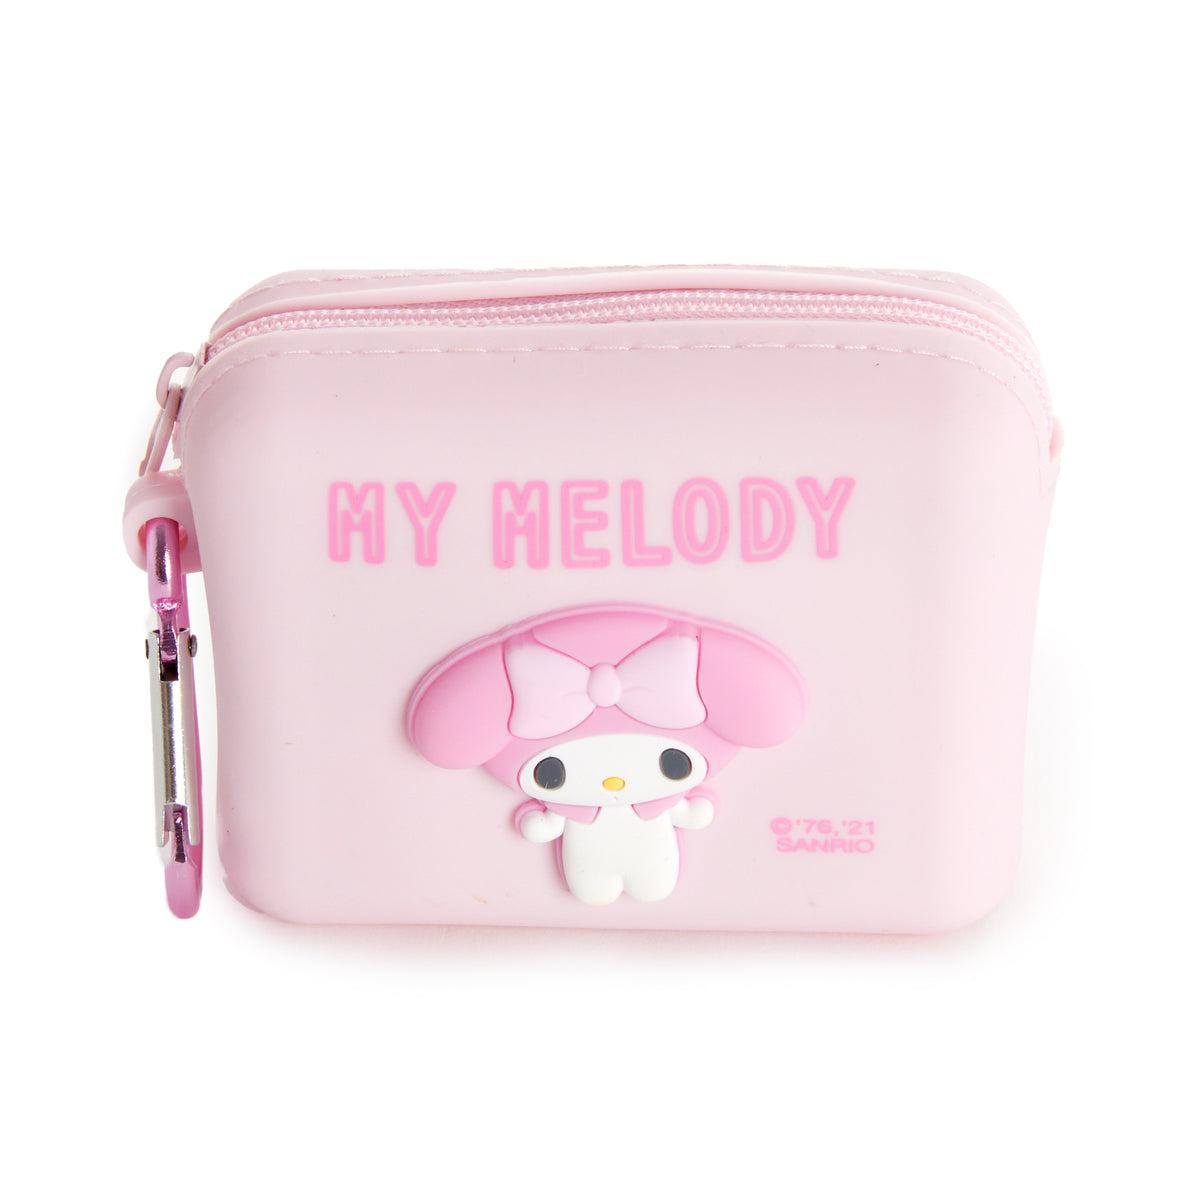 My Melody Mini Silicone Pouch Bags Japan Original   